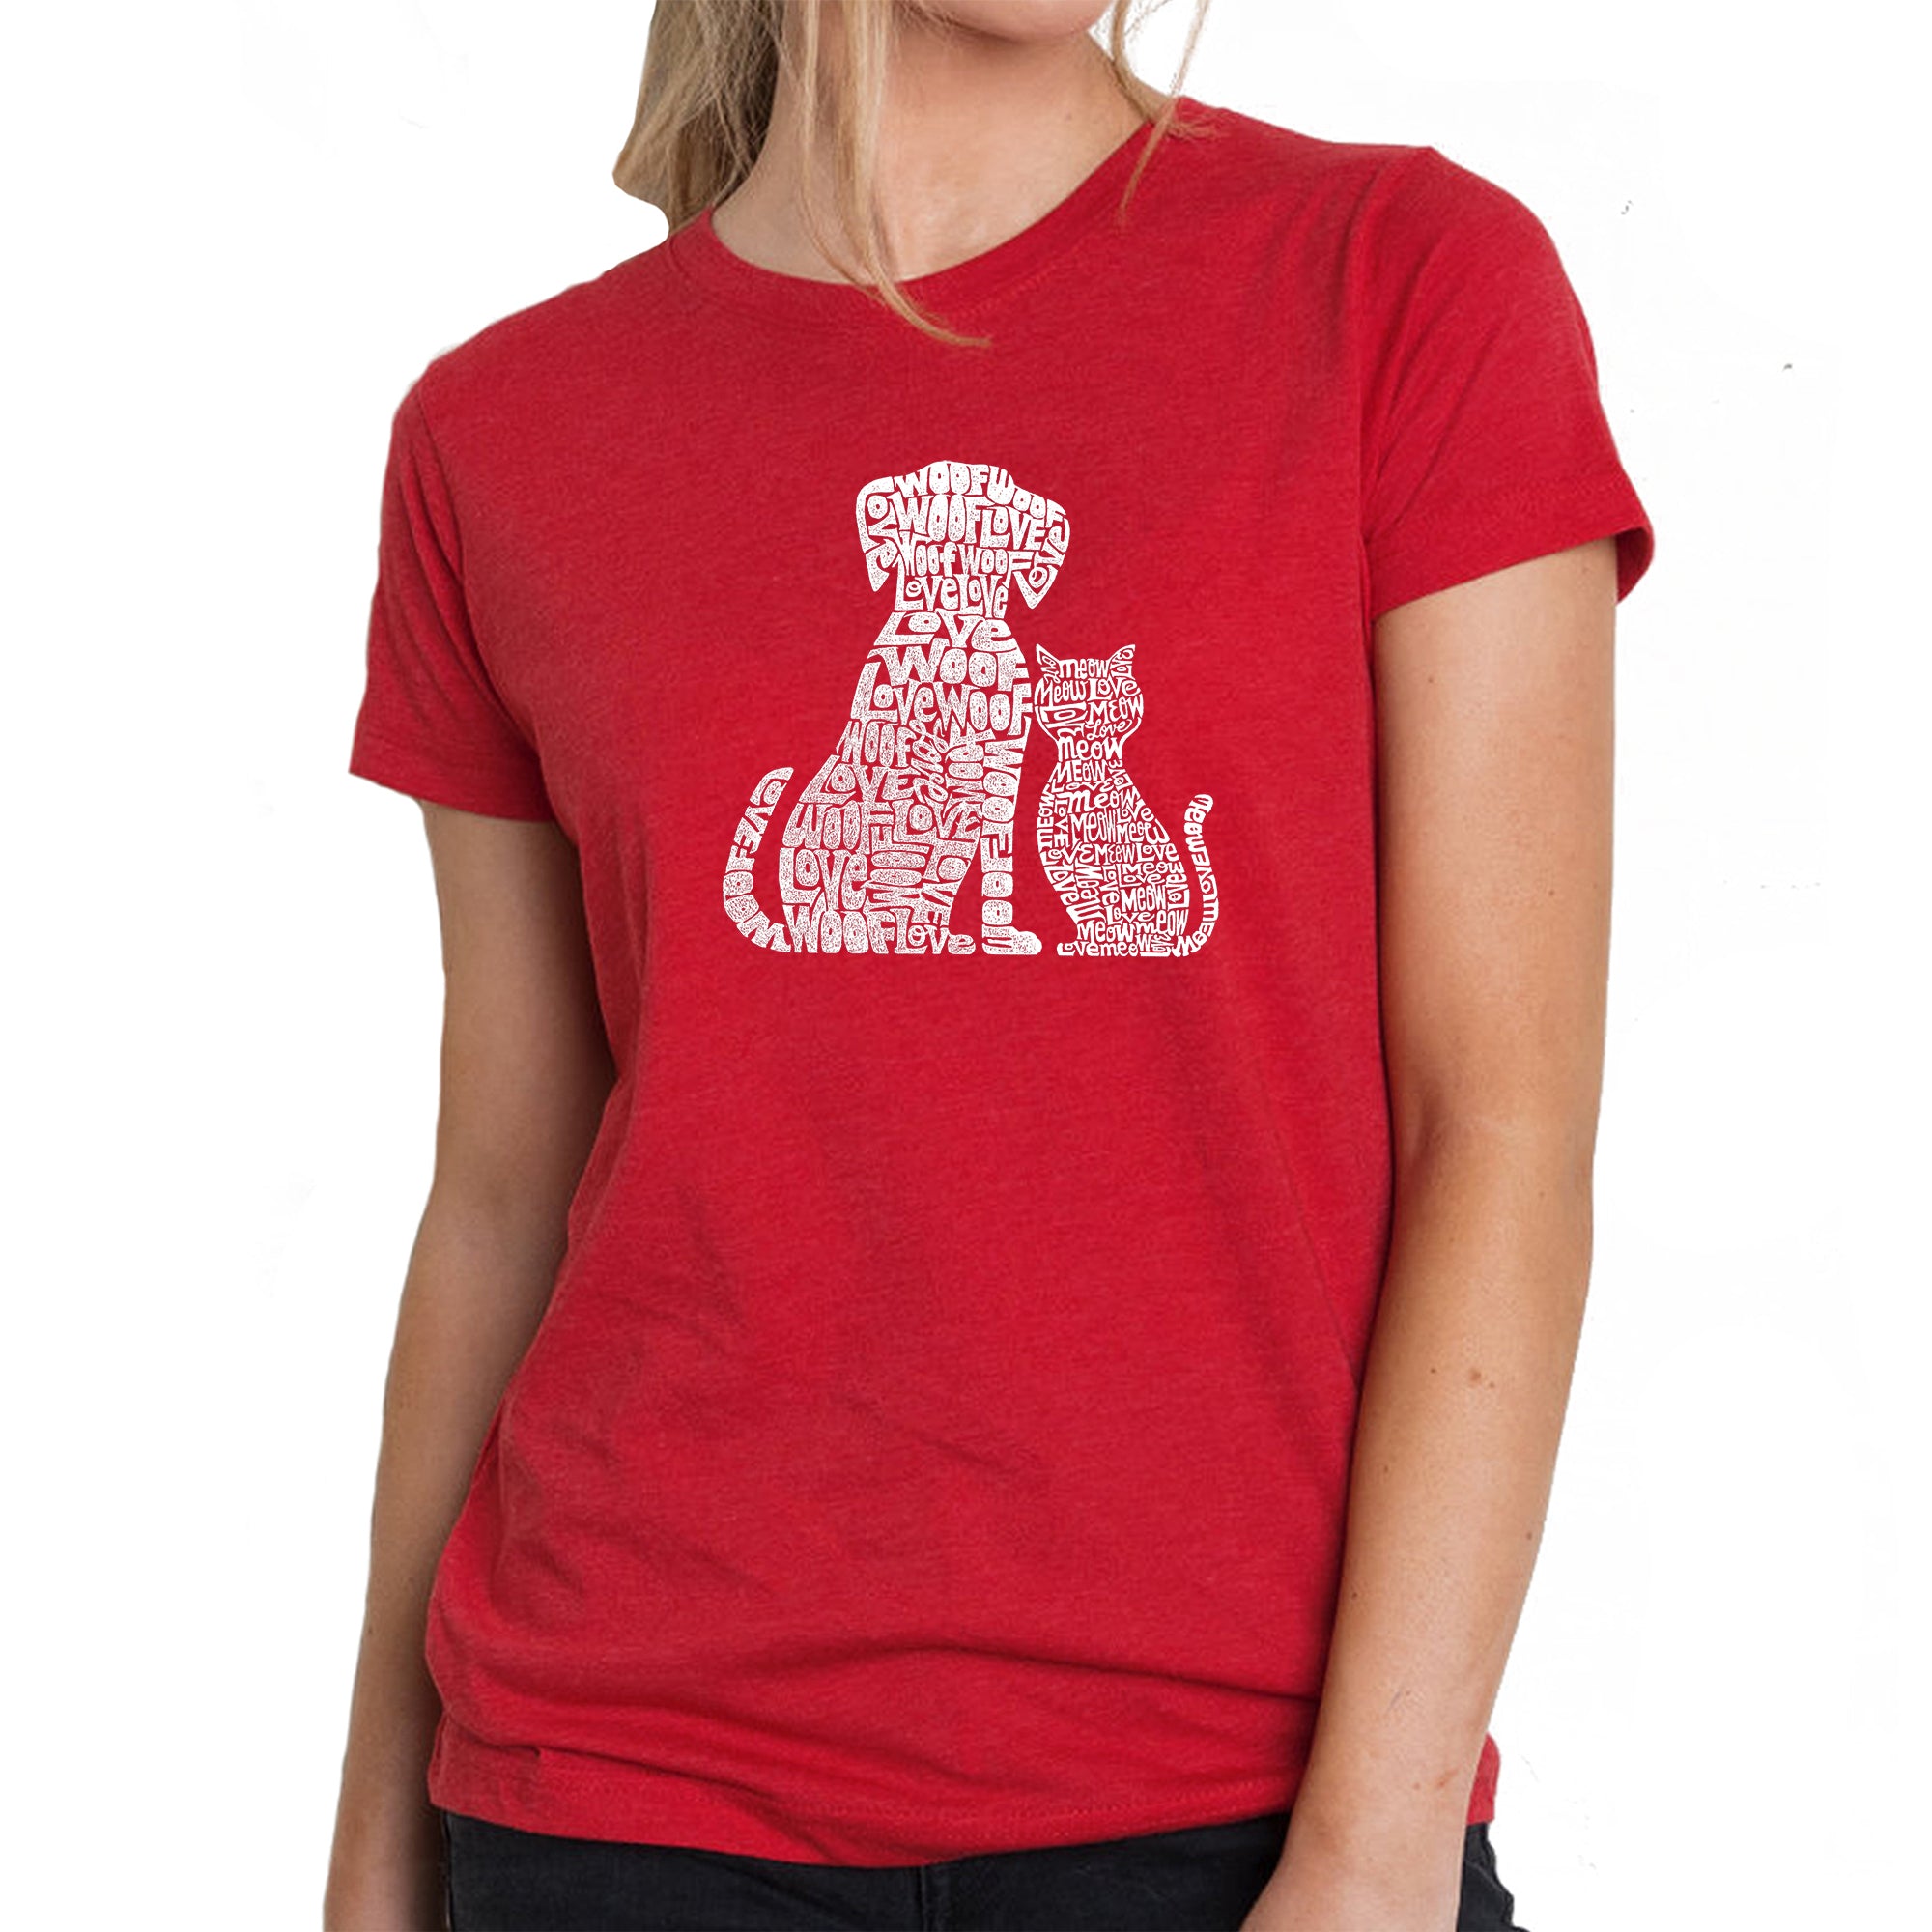 Dogs And Cats - Women's Premium Blend Word Art T-Shirt - Red - XX-Large